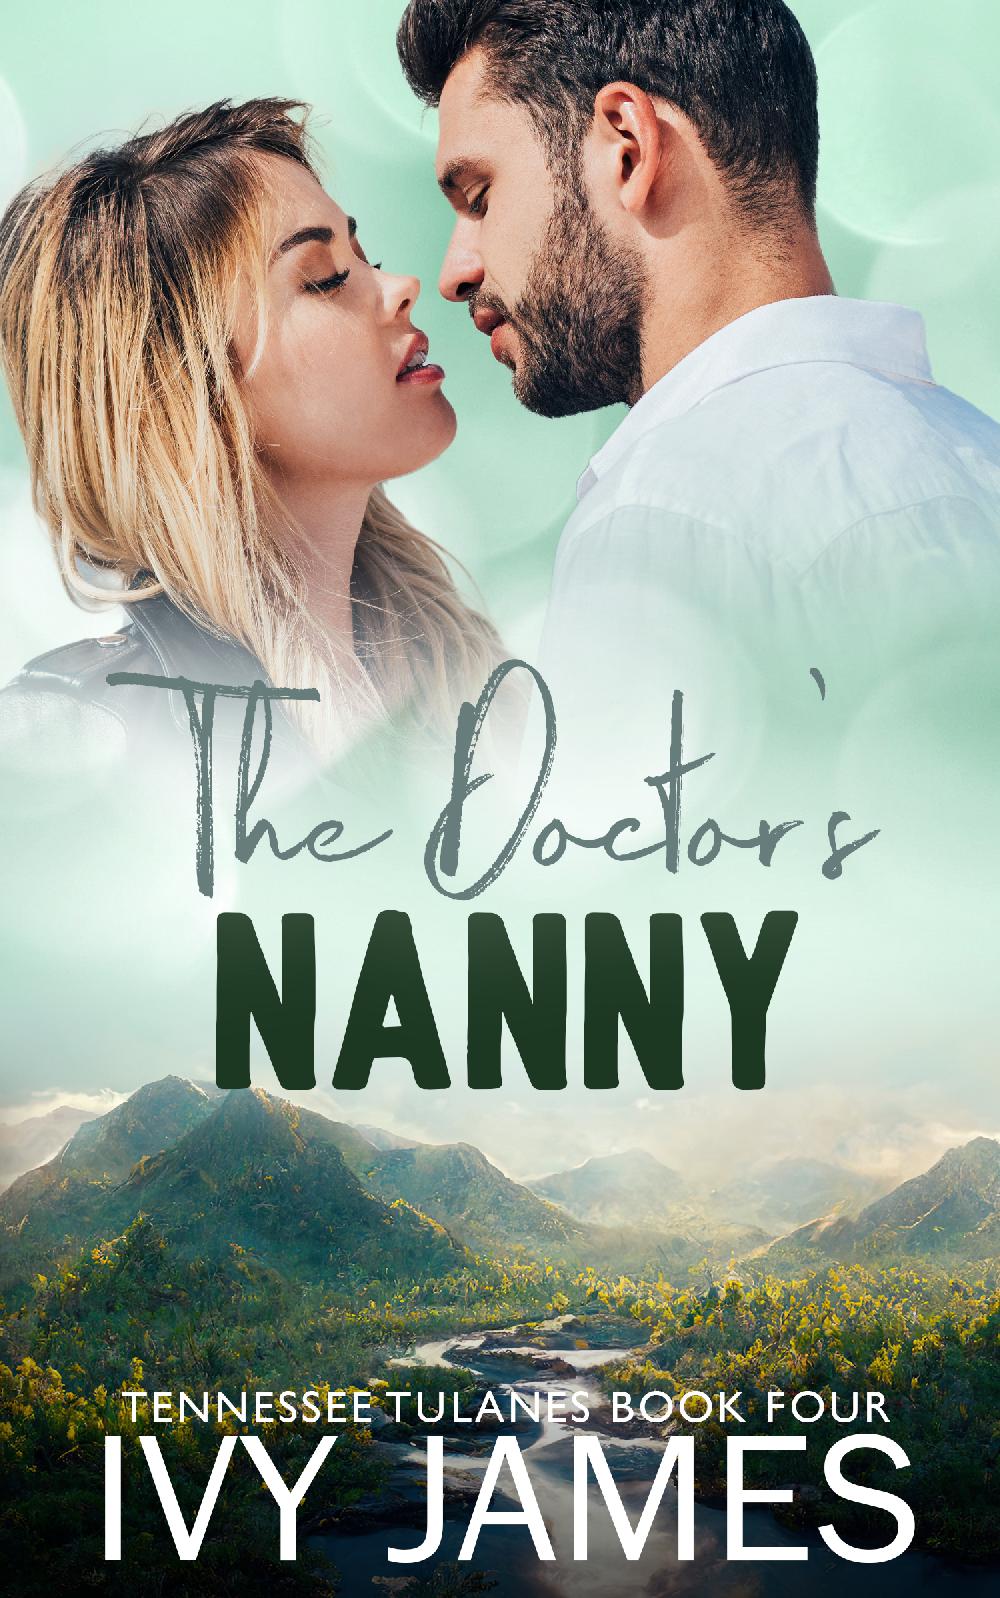 The Doctor's Nanny